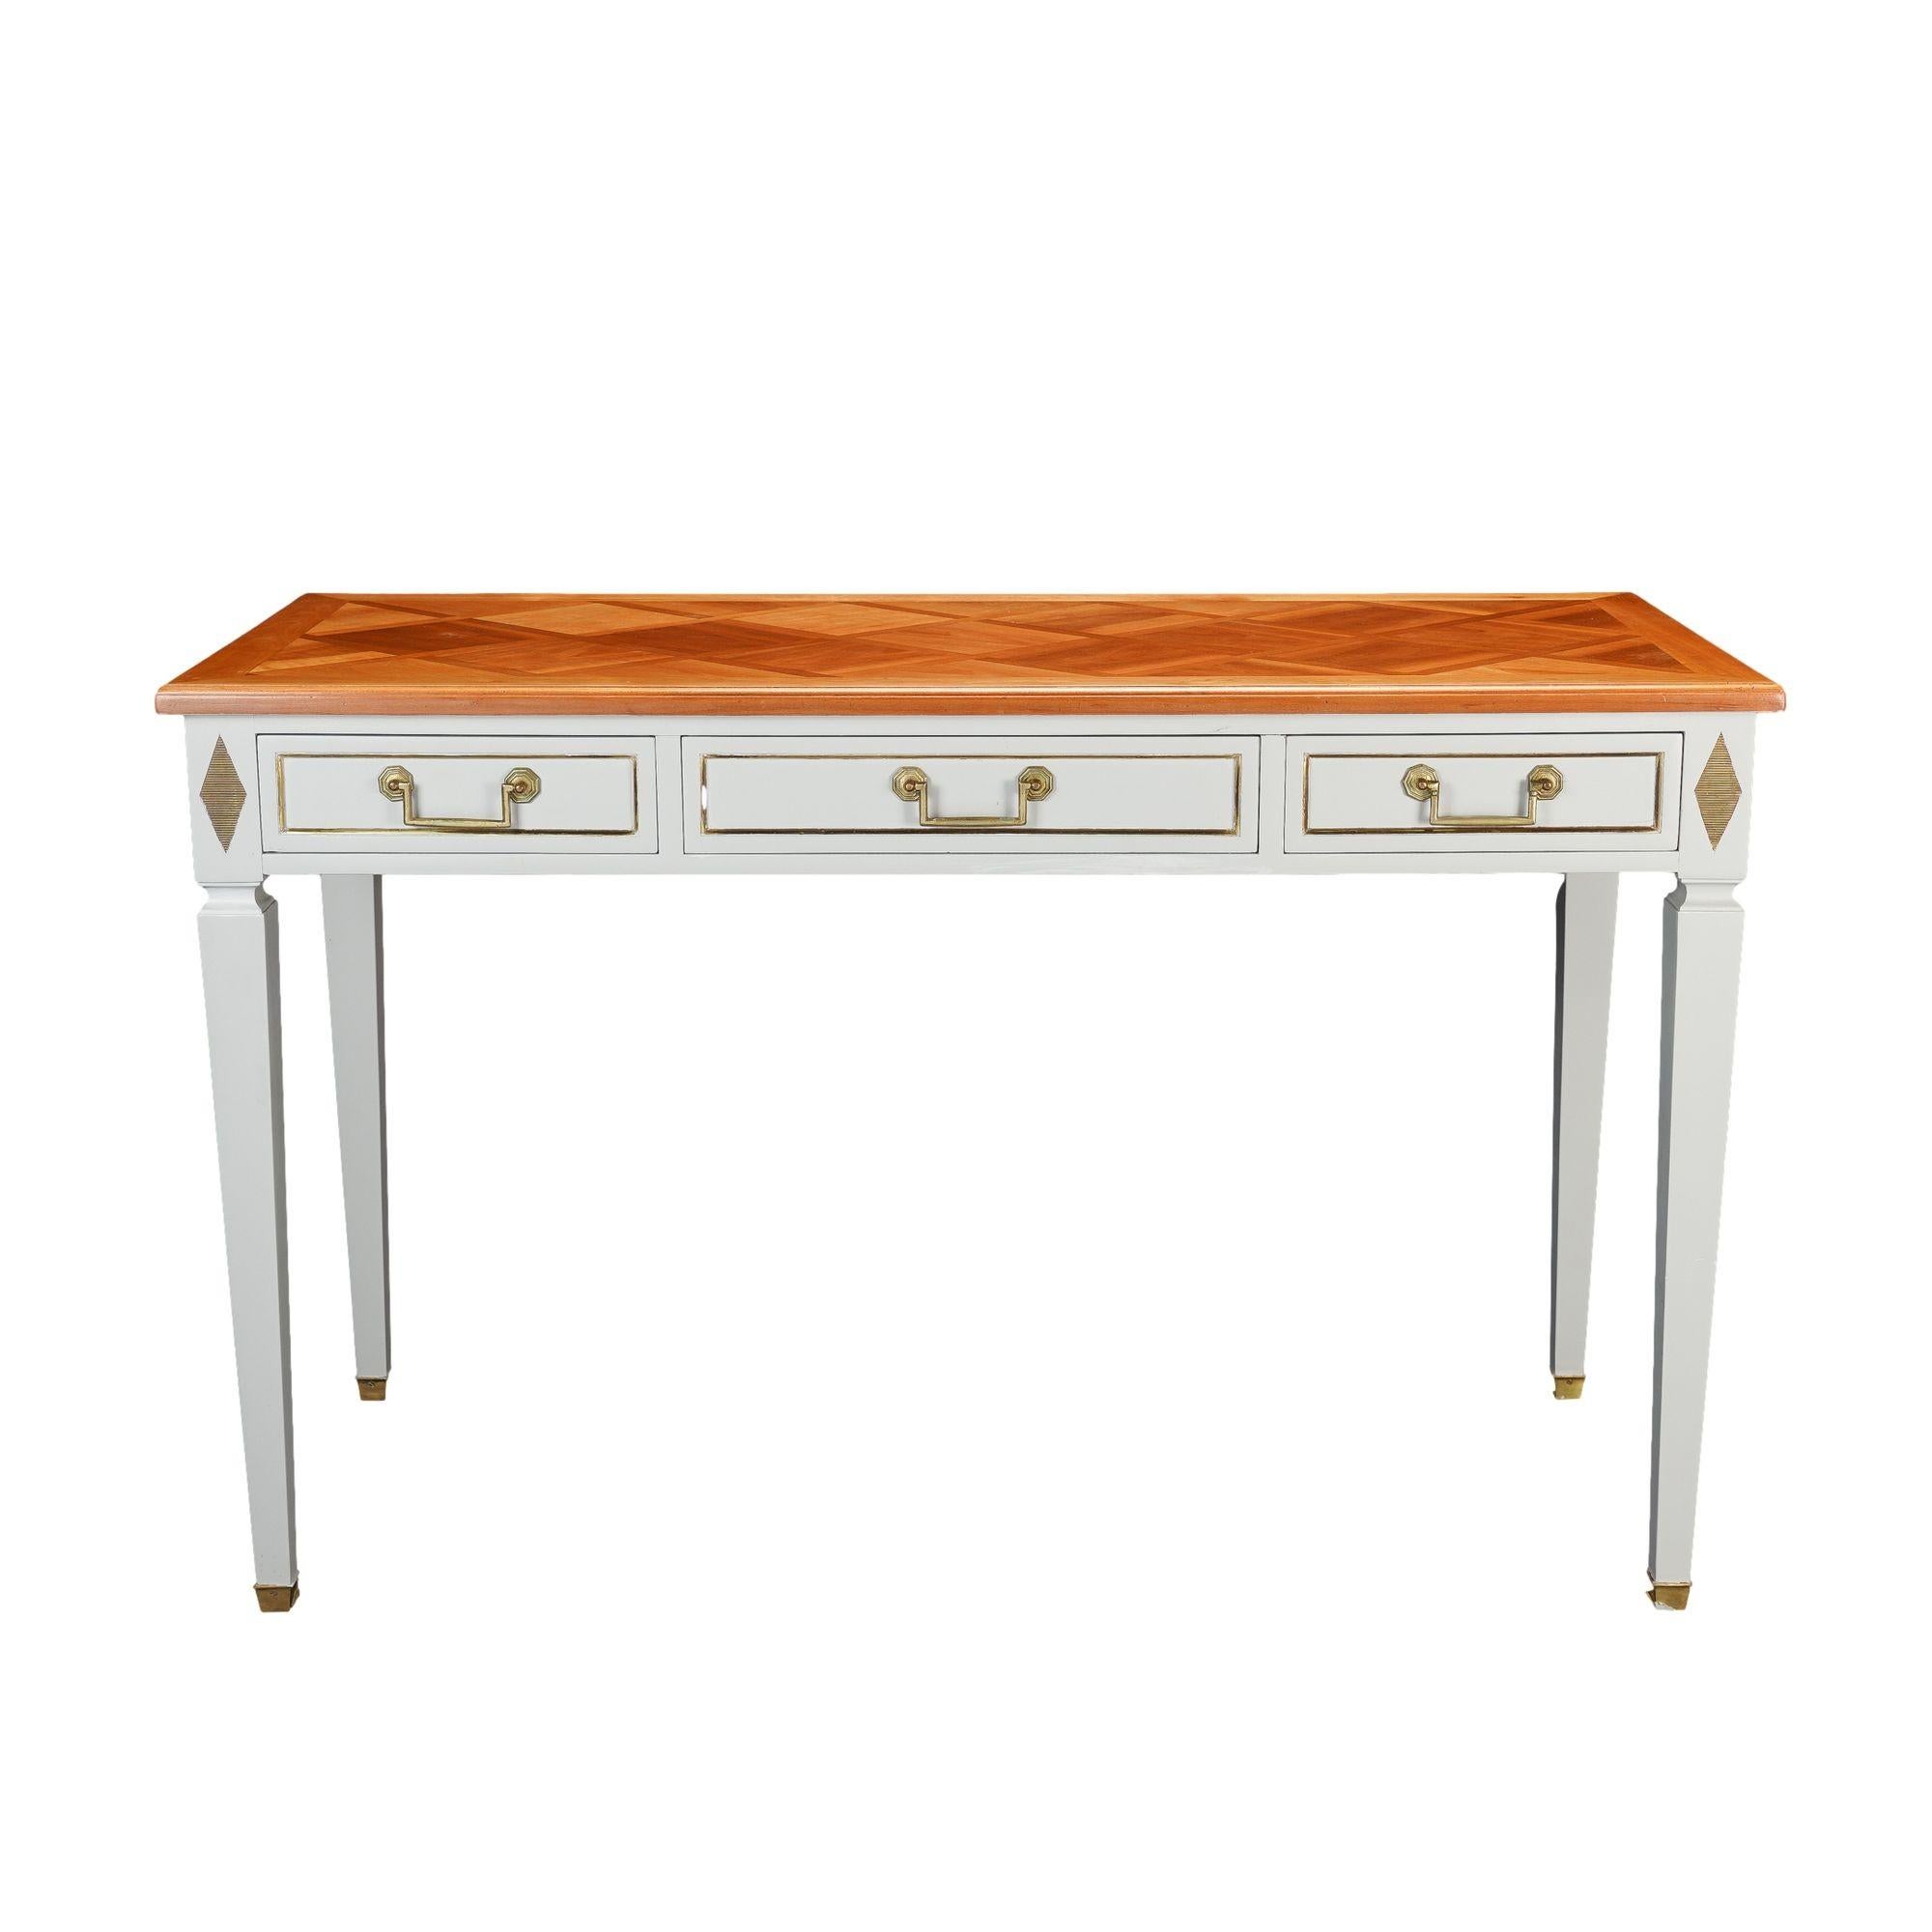 Academic Revival rectangular bureau plat in the French Directoire taste. The fruitwood marquetry top is mounted on a conforming apron fitted with a divided long drawer. Each drawer face is banded with a brass molding and fitted with square bail &